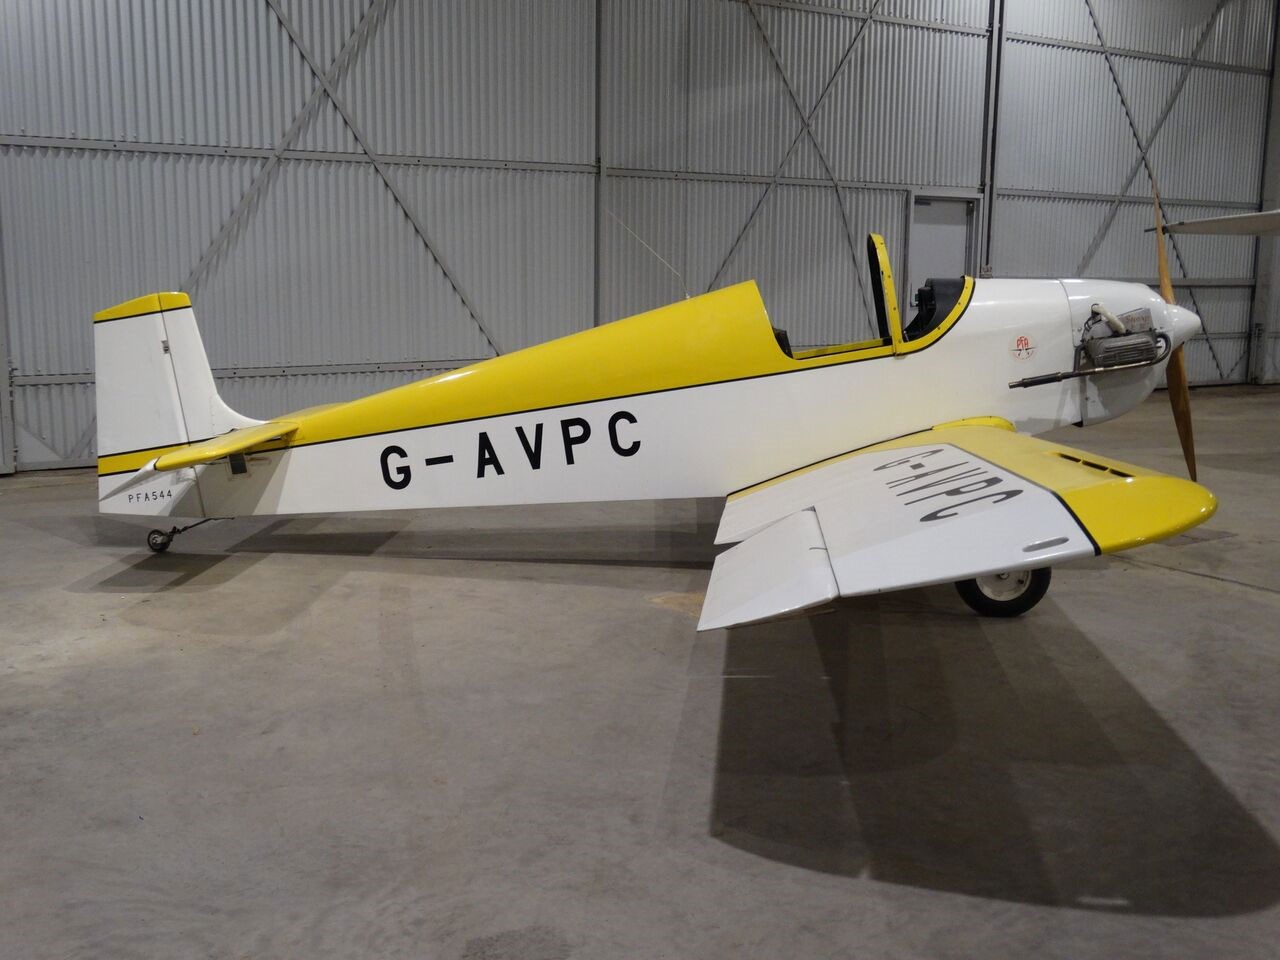 The side of a yellow and white Druine Turbulent aircraft inside a hangar.